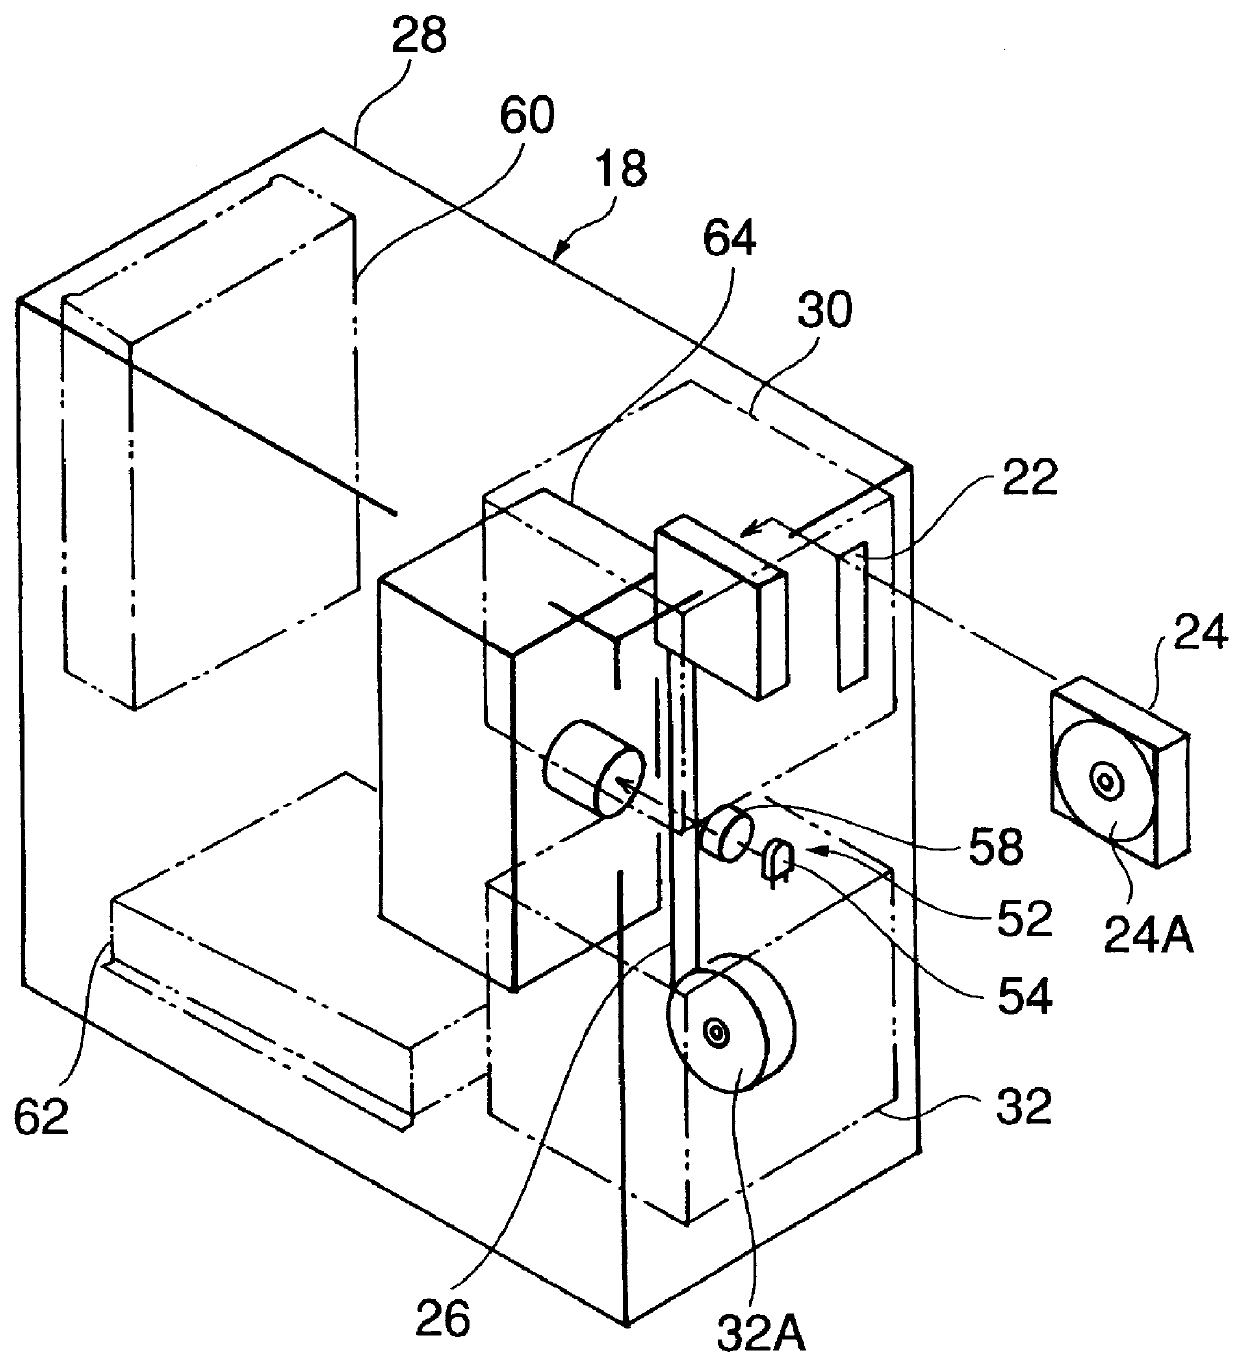 Microfilm search device and method